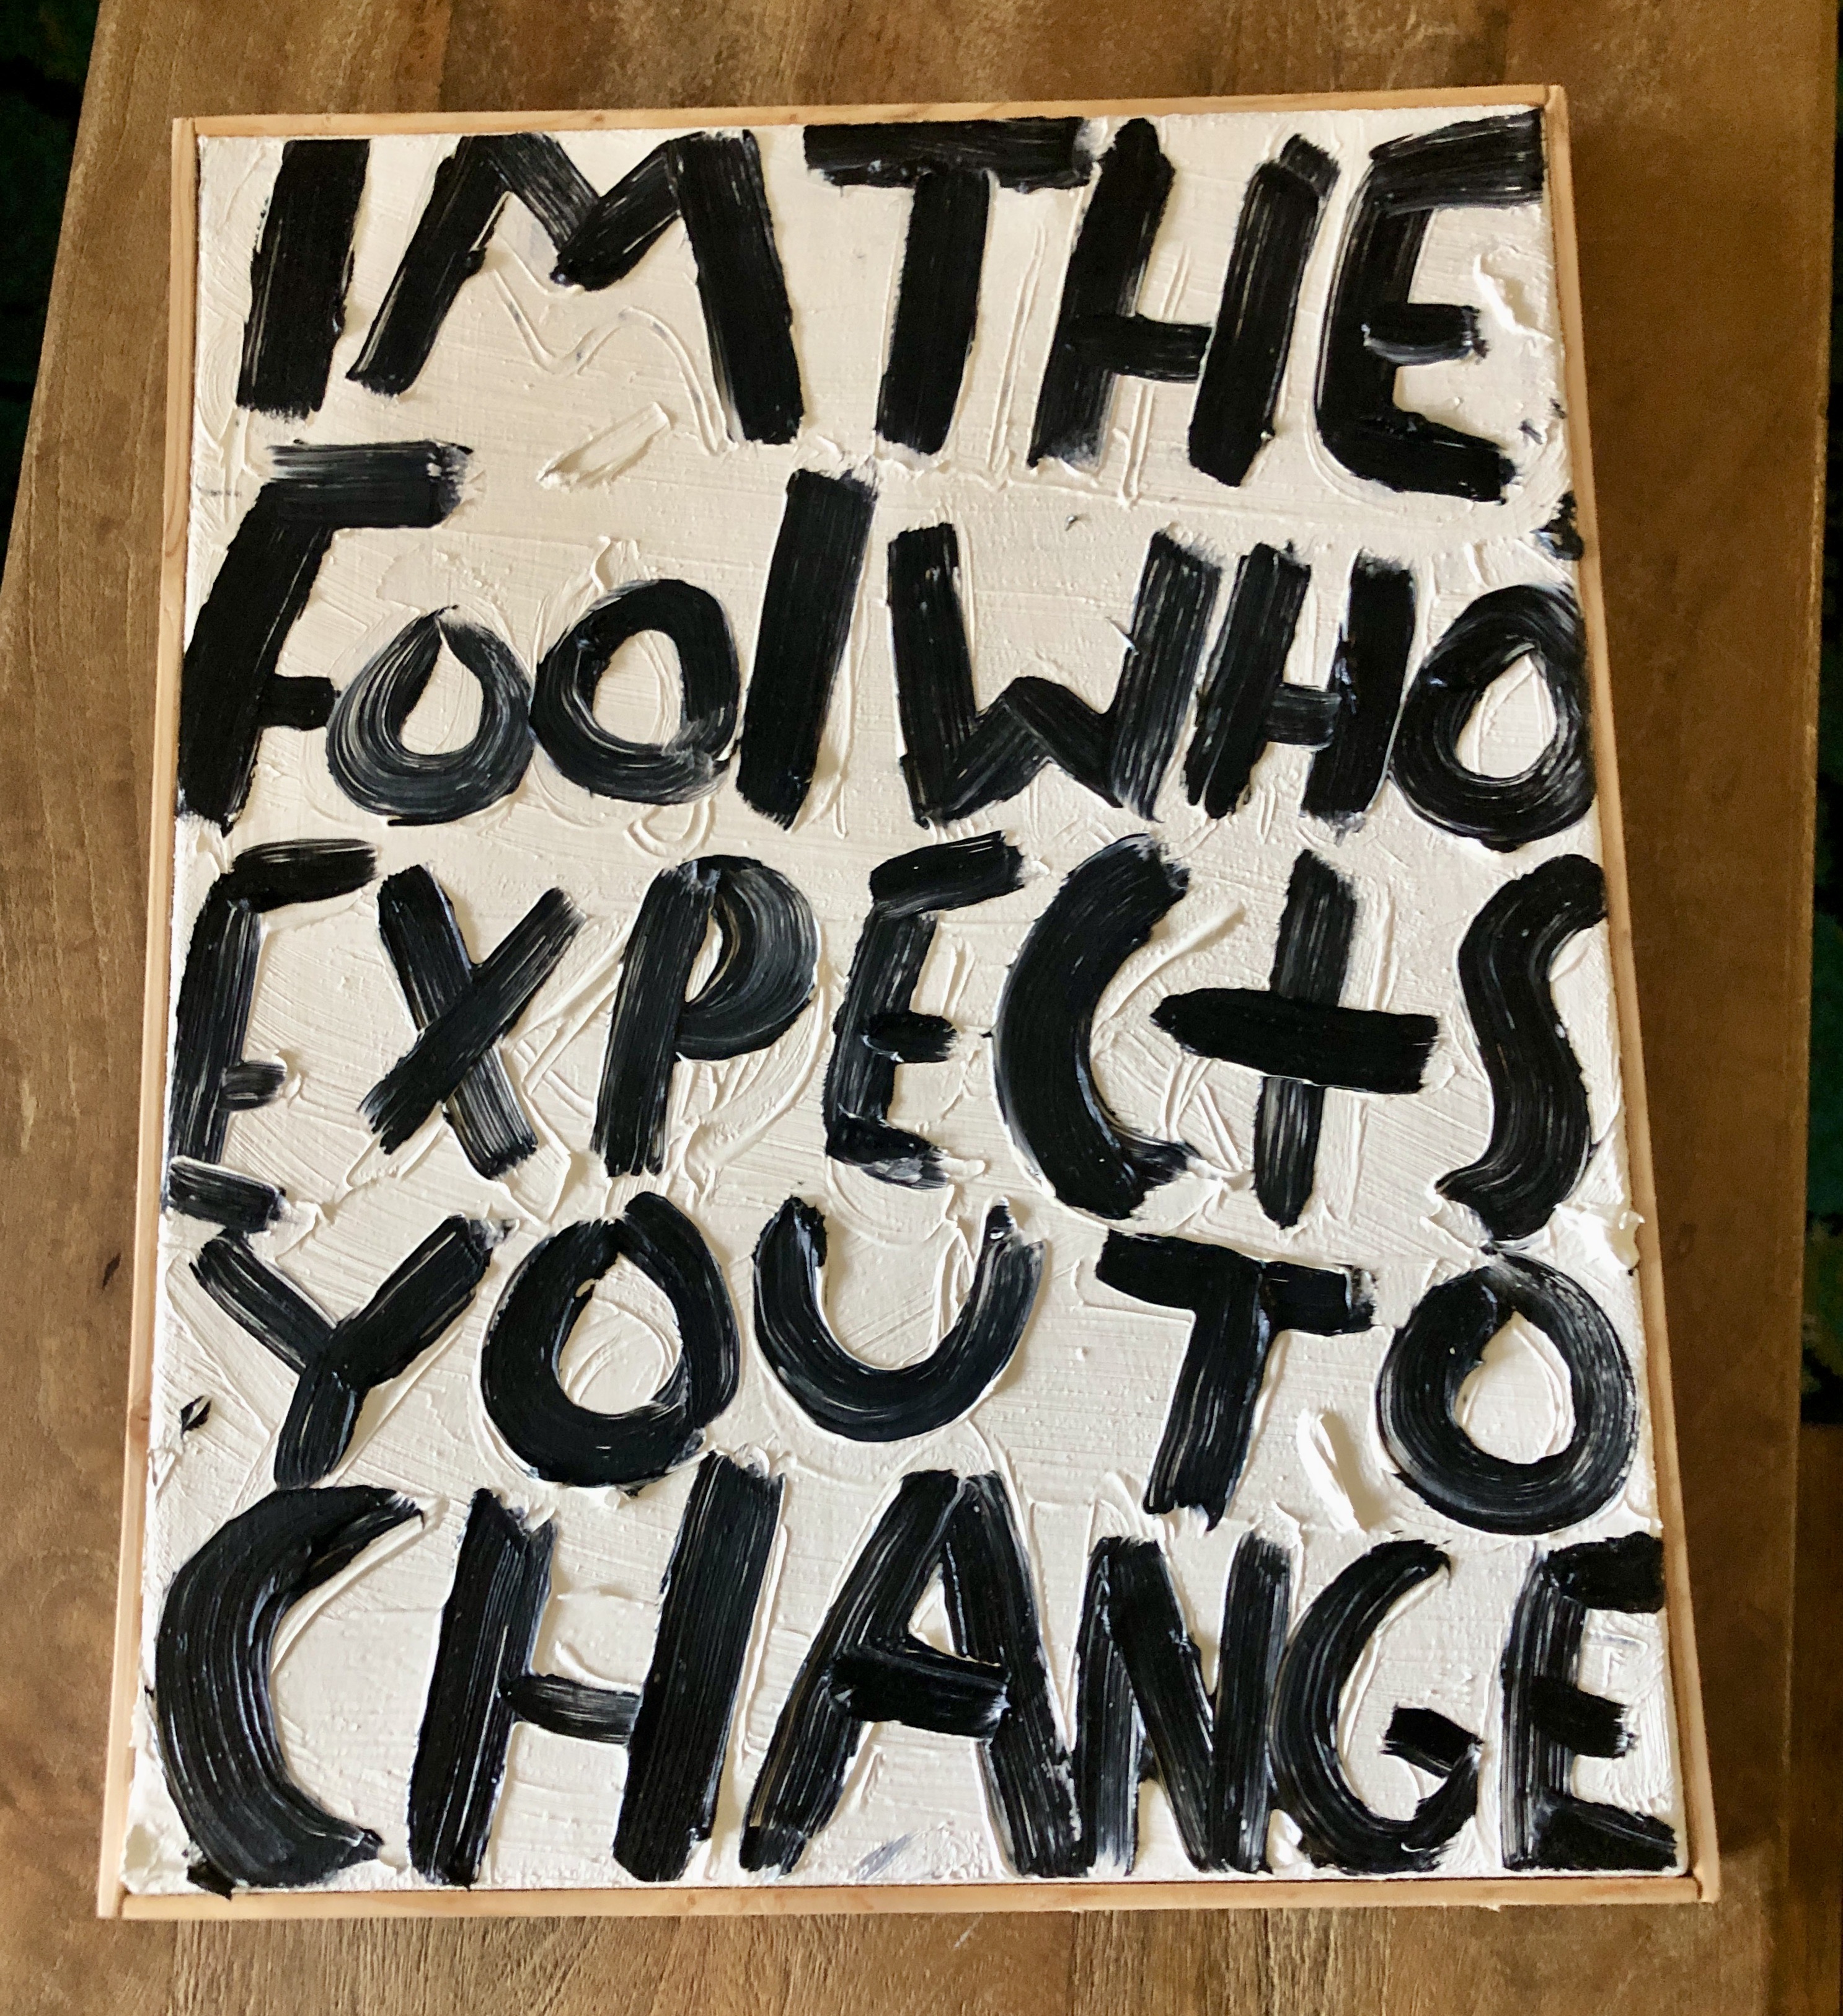 Eric Stefanski's I’m the Fool that Expects you to Change is an oil on canvas text art painting from 2023. It depicts the title in black letters on a white background.